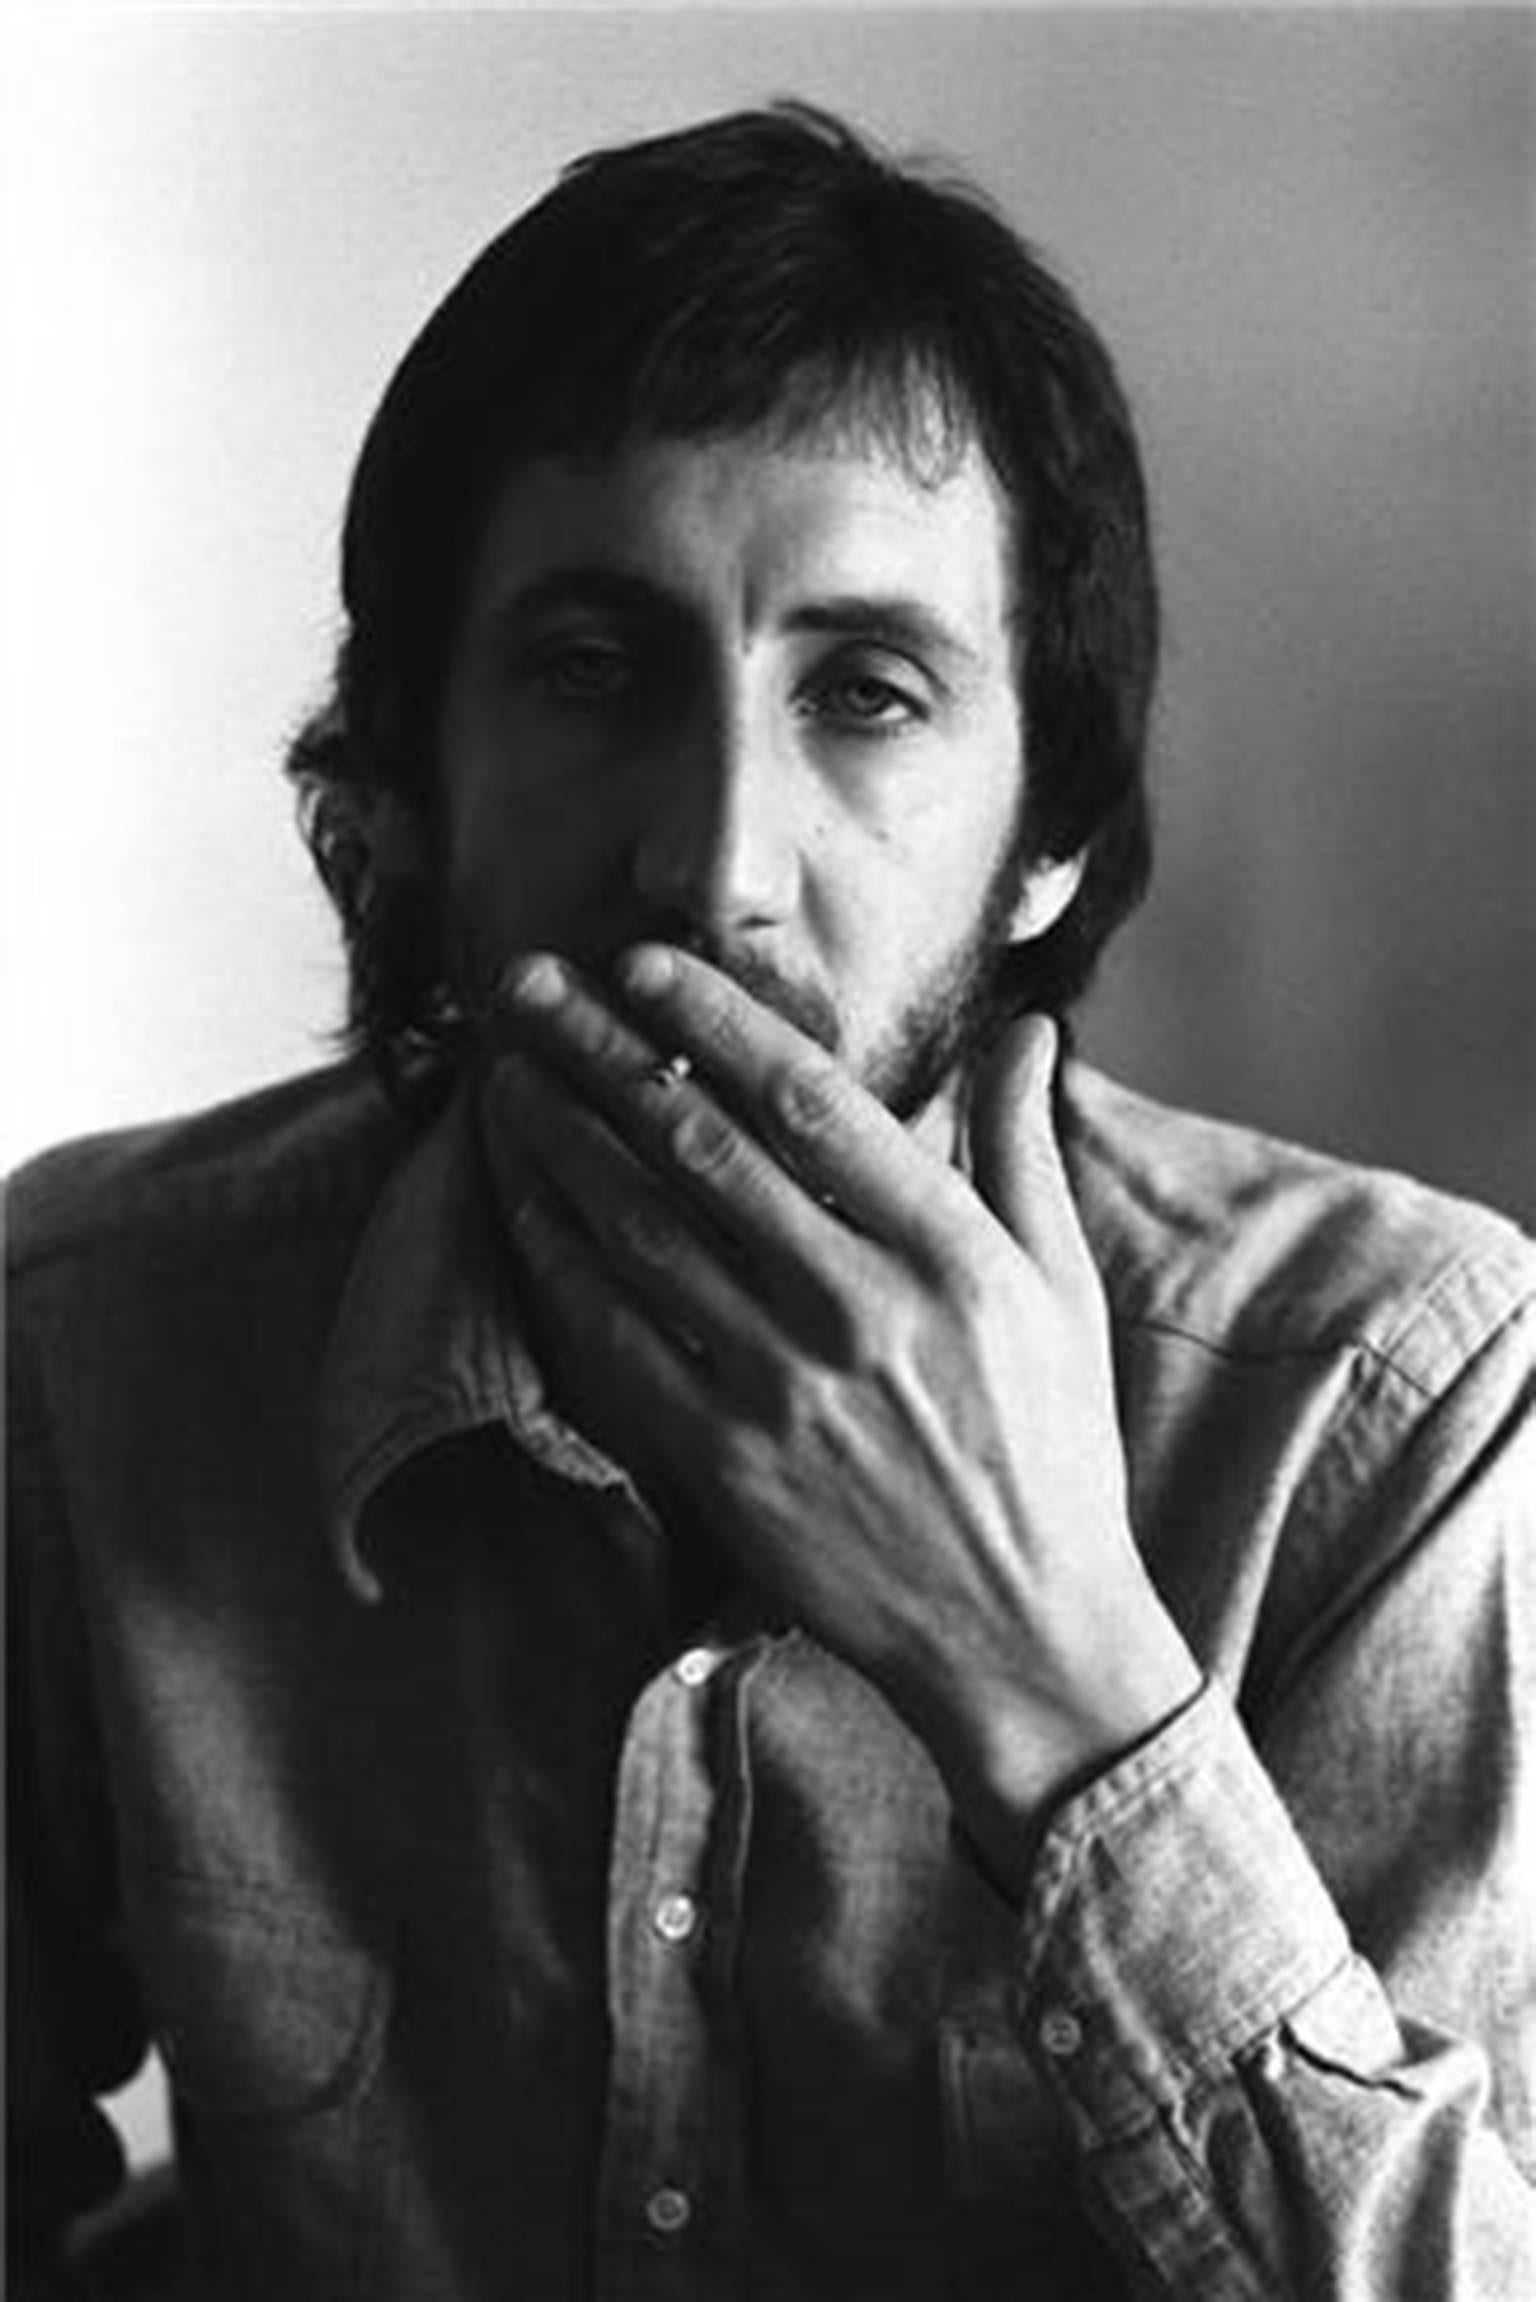 Neal Preston Black and White Photograph - Pete Townshend, Los Angeles, CA 1973